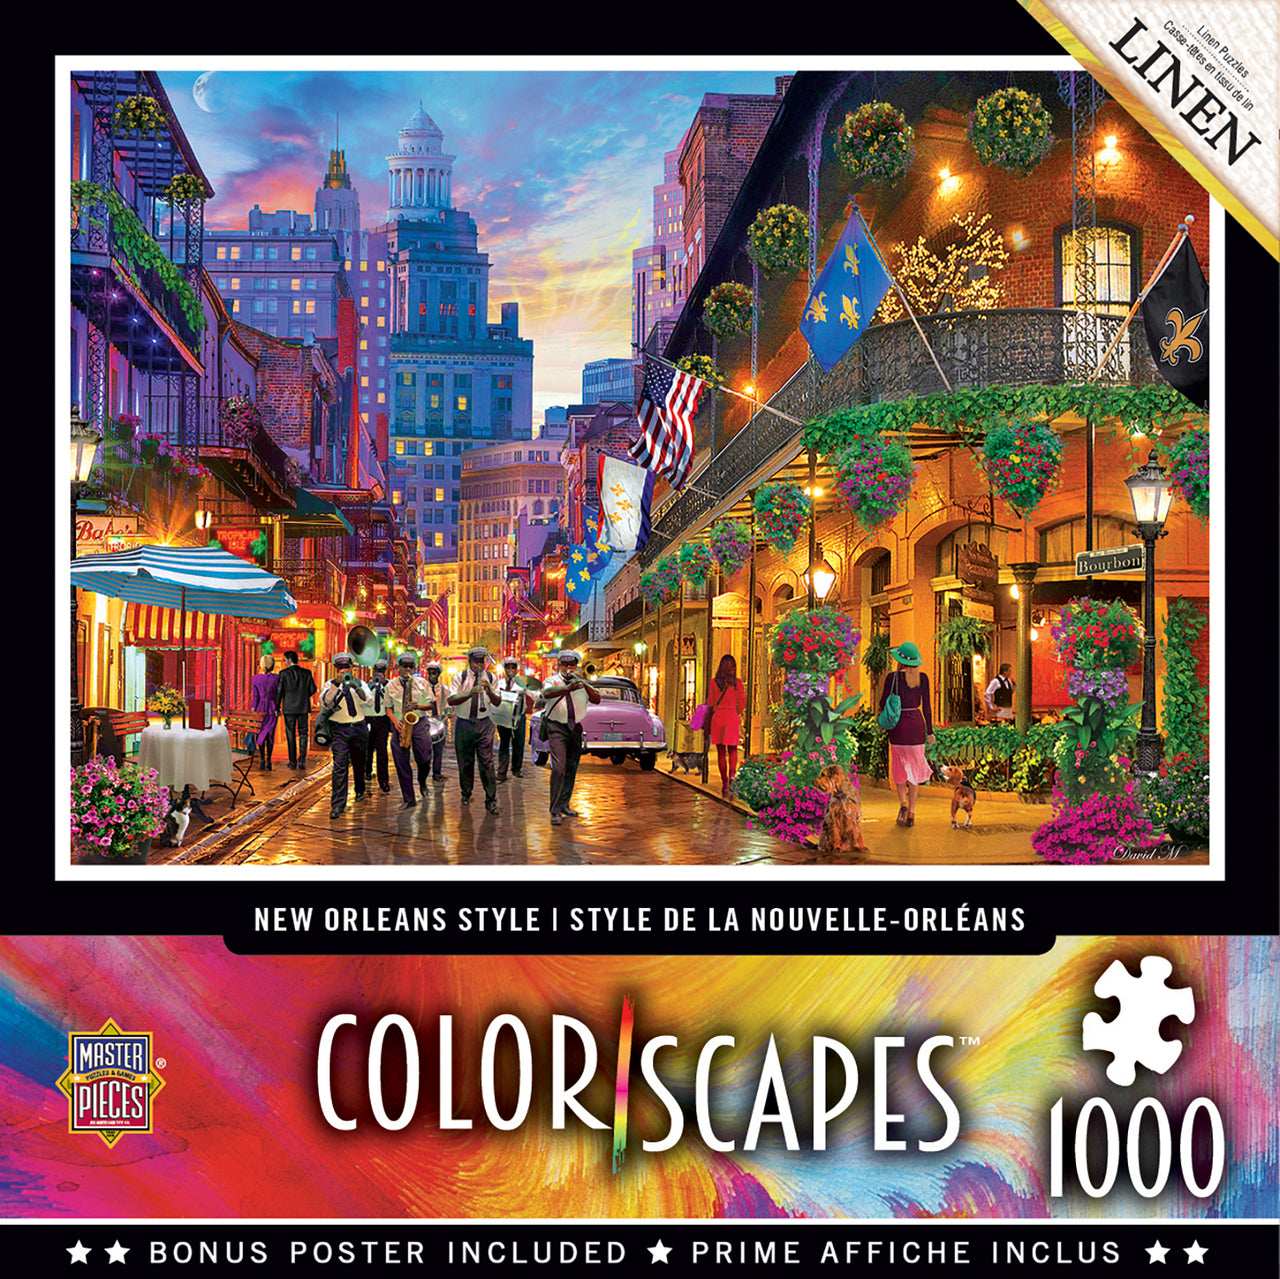 Colorscapes - New Orleans Style - 1000 Piece Linen Jigsaw Puzzle by Masterpieces